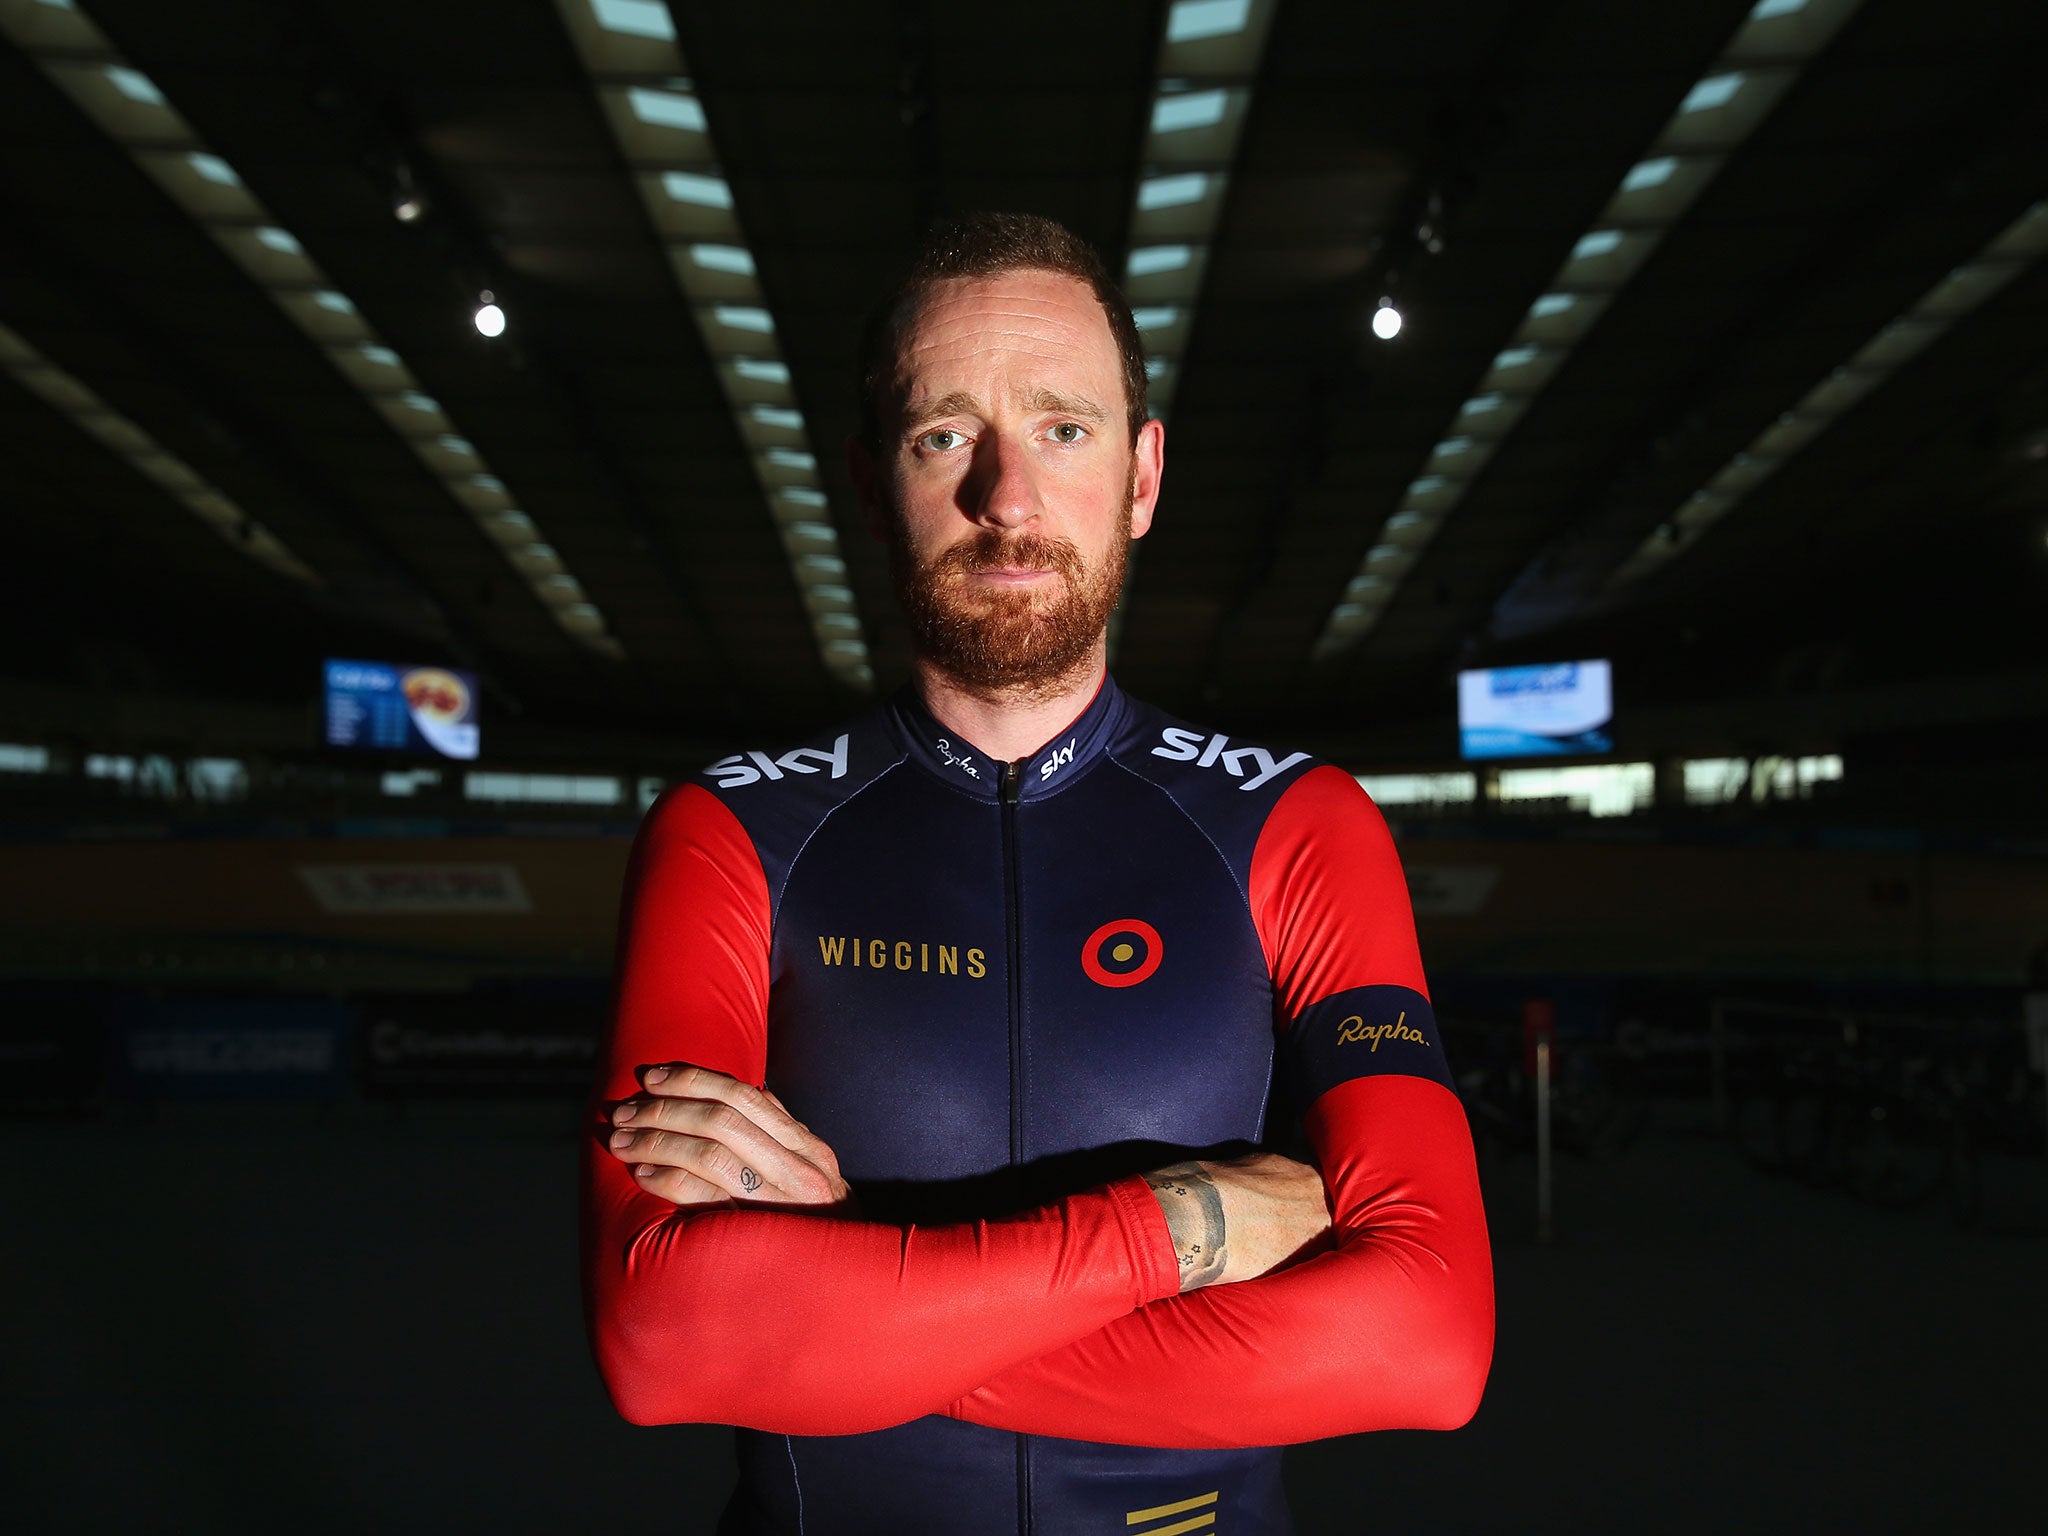 Bradley Wiggins ahead of his hour record attempt